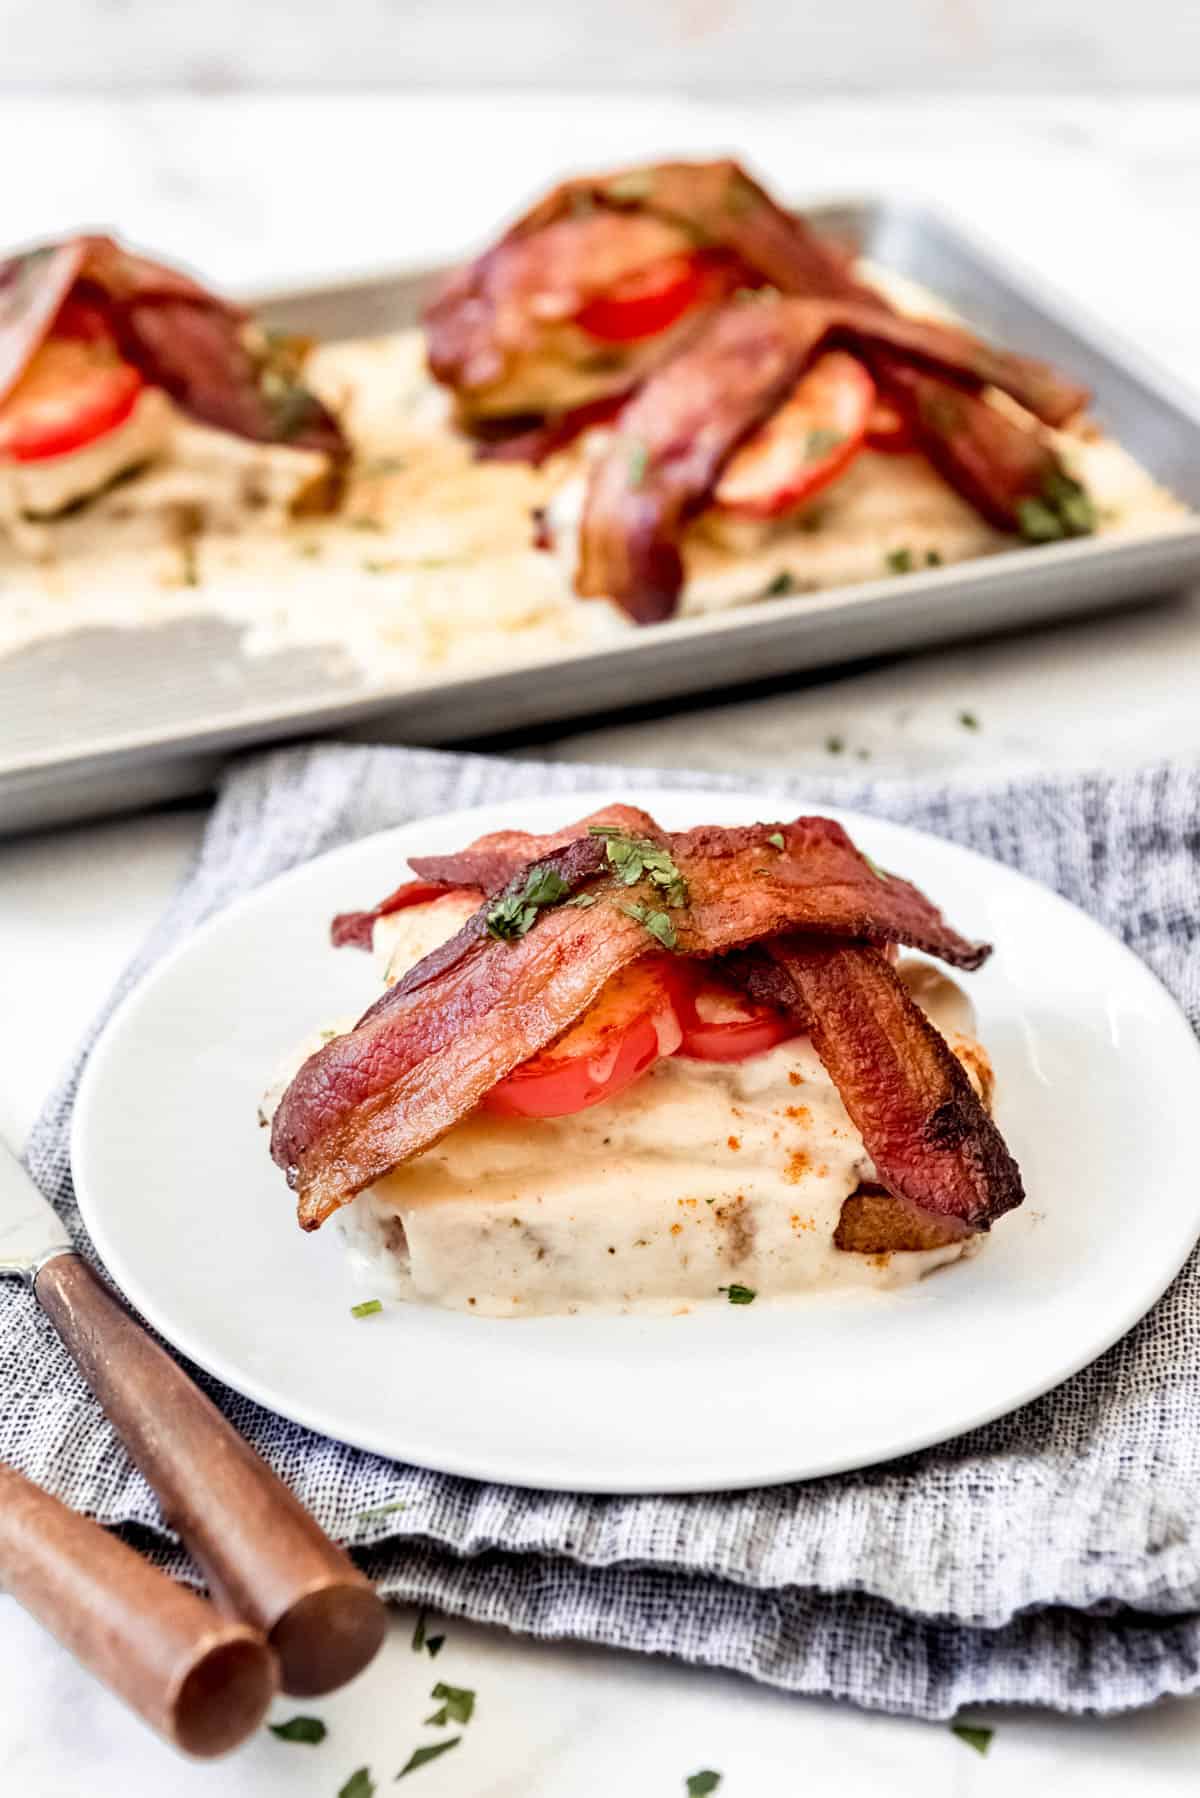 Kentucky hot brown sandwich on white plate, with pan of sandwiches in background.